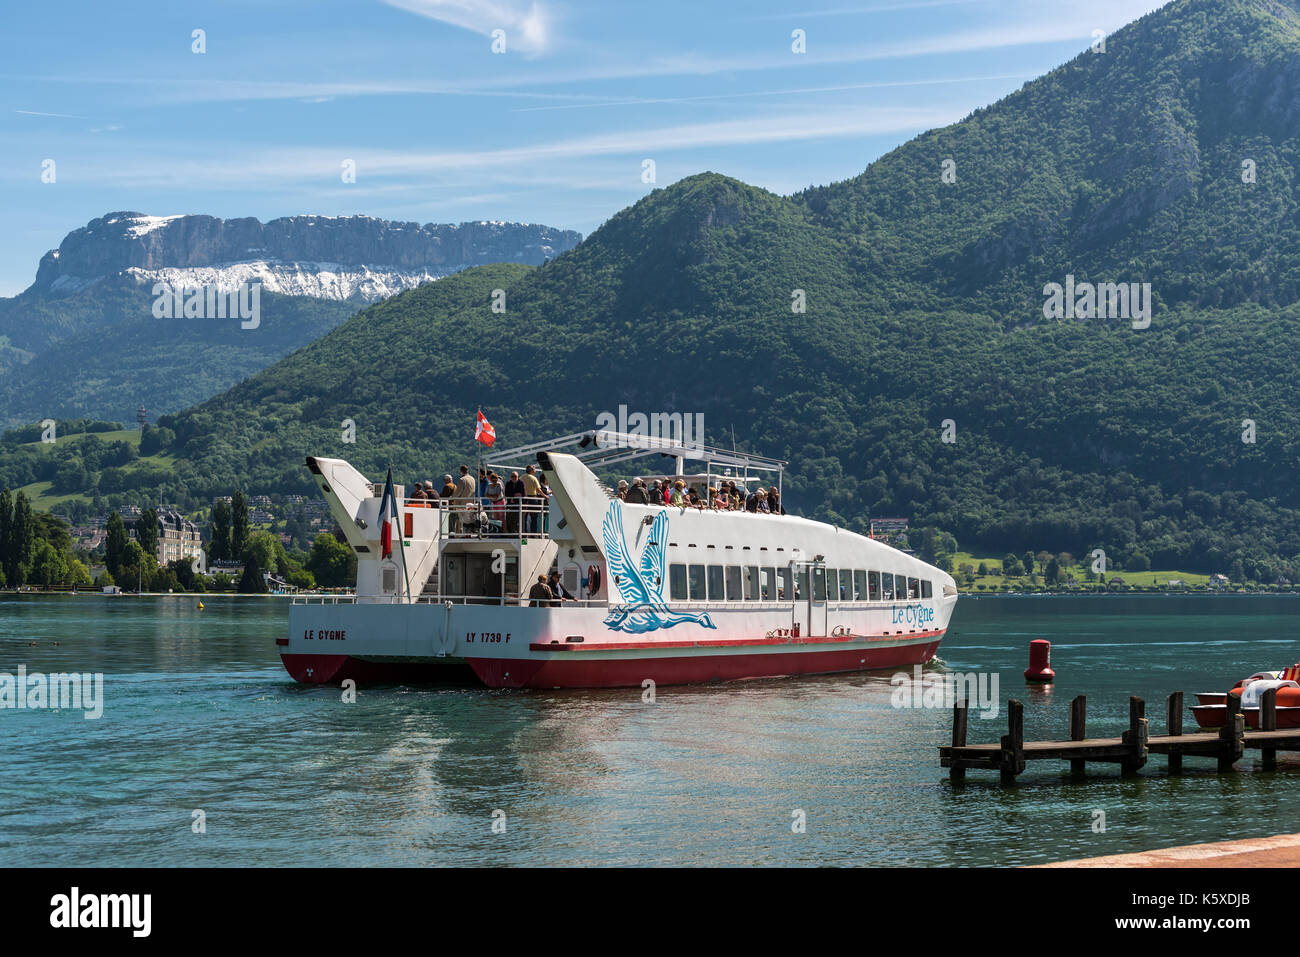 Annecy, France - May 25, 2016: Le Cygne catamaran trip boat on Annecy lake, Haute-Savoie, France. Stock Photo